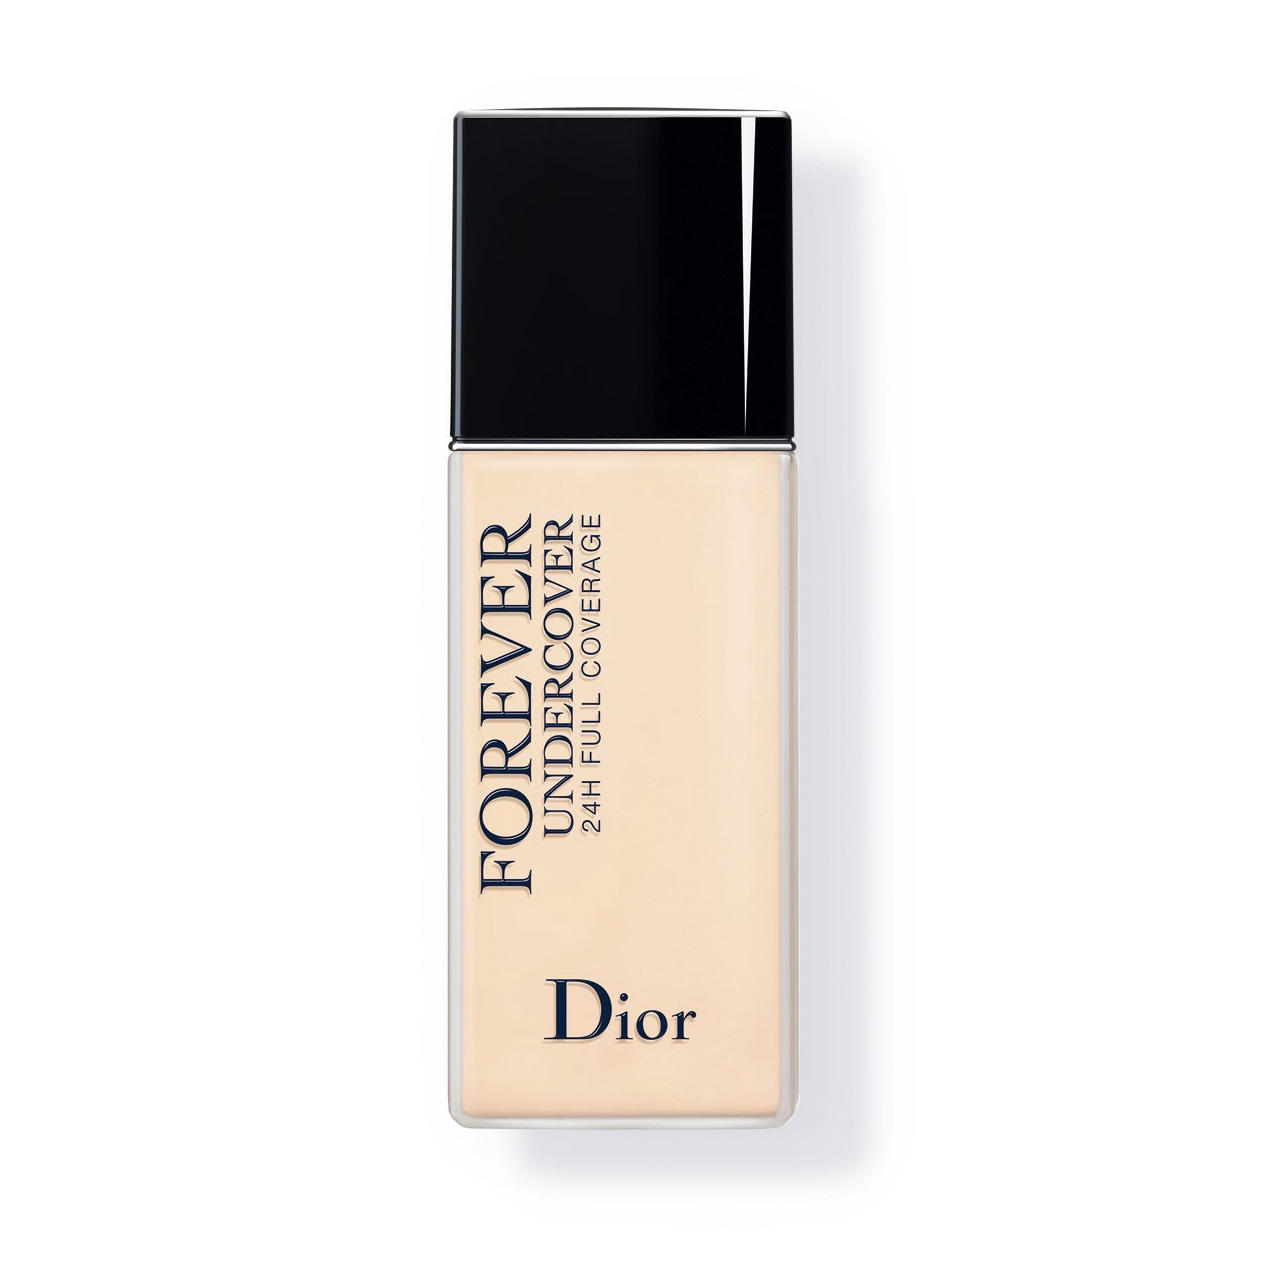 Dior Diorskin Forever Undercover Foundation Ivory 010